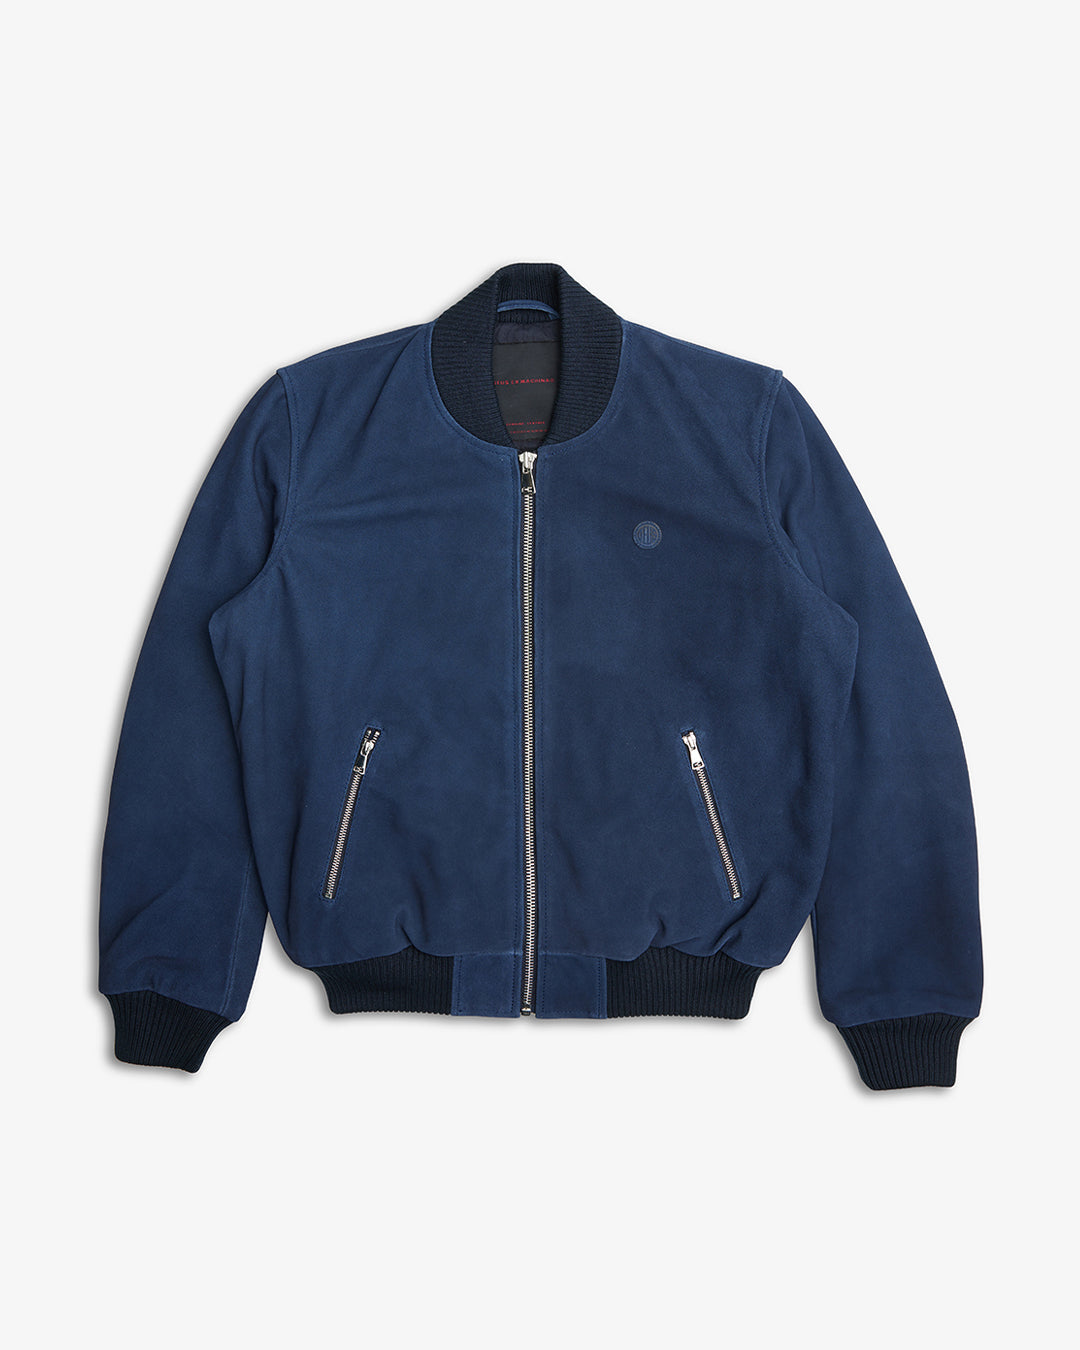 Thunder Suede Bomber